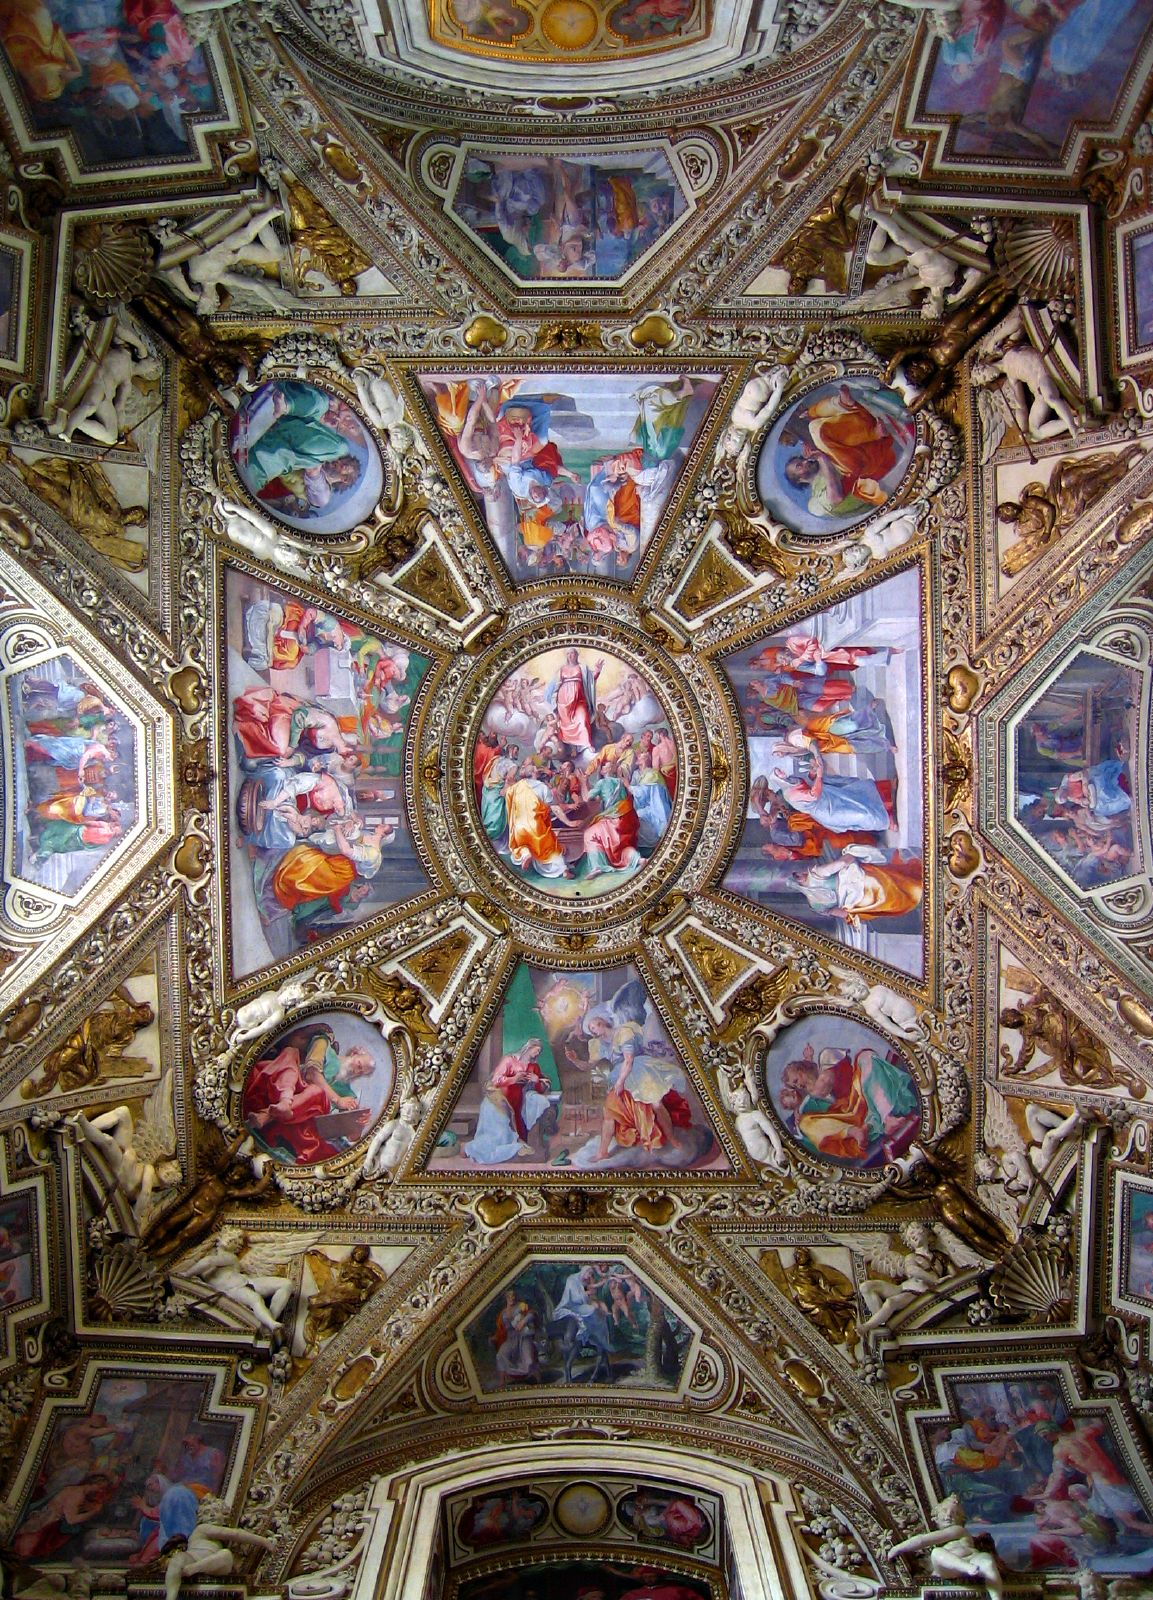 this ceiling is adorned with colorful paintings of art